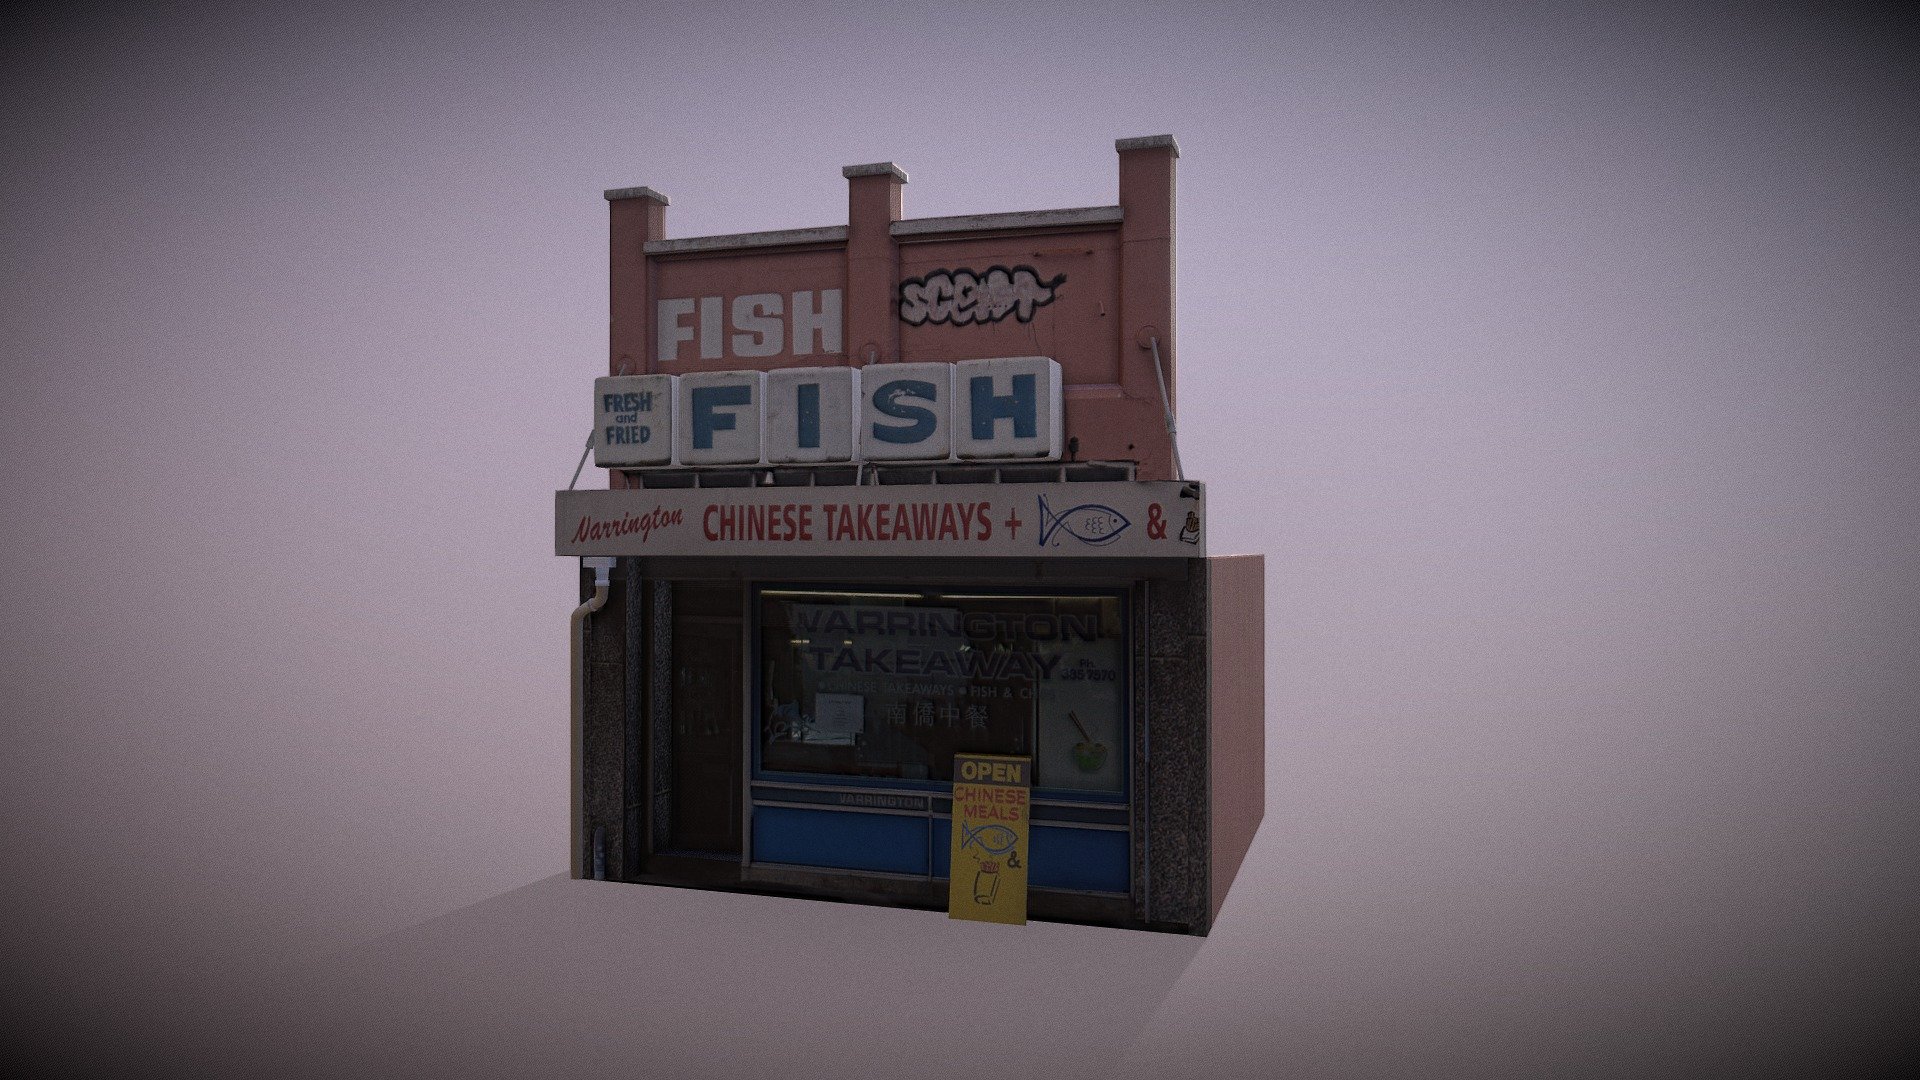 Fish and Chips Shop